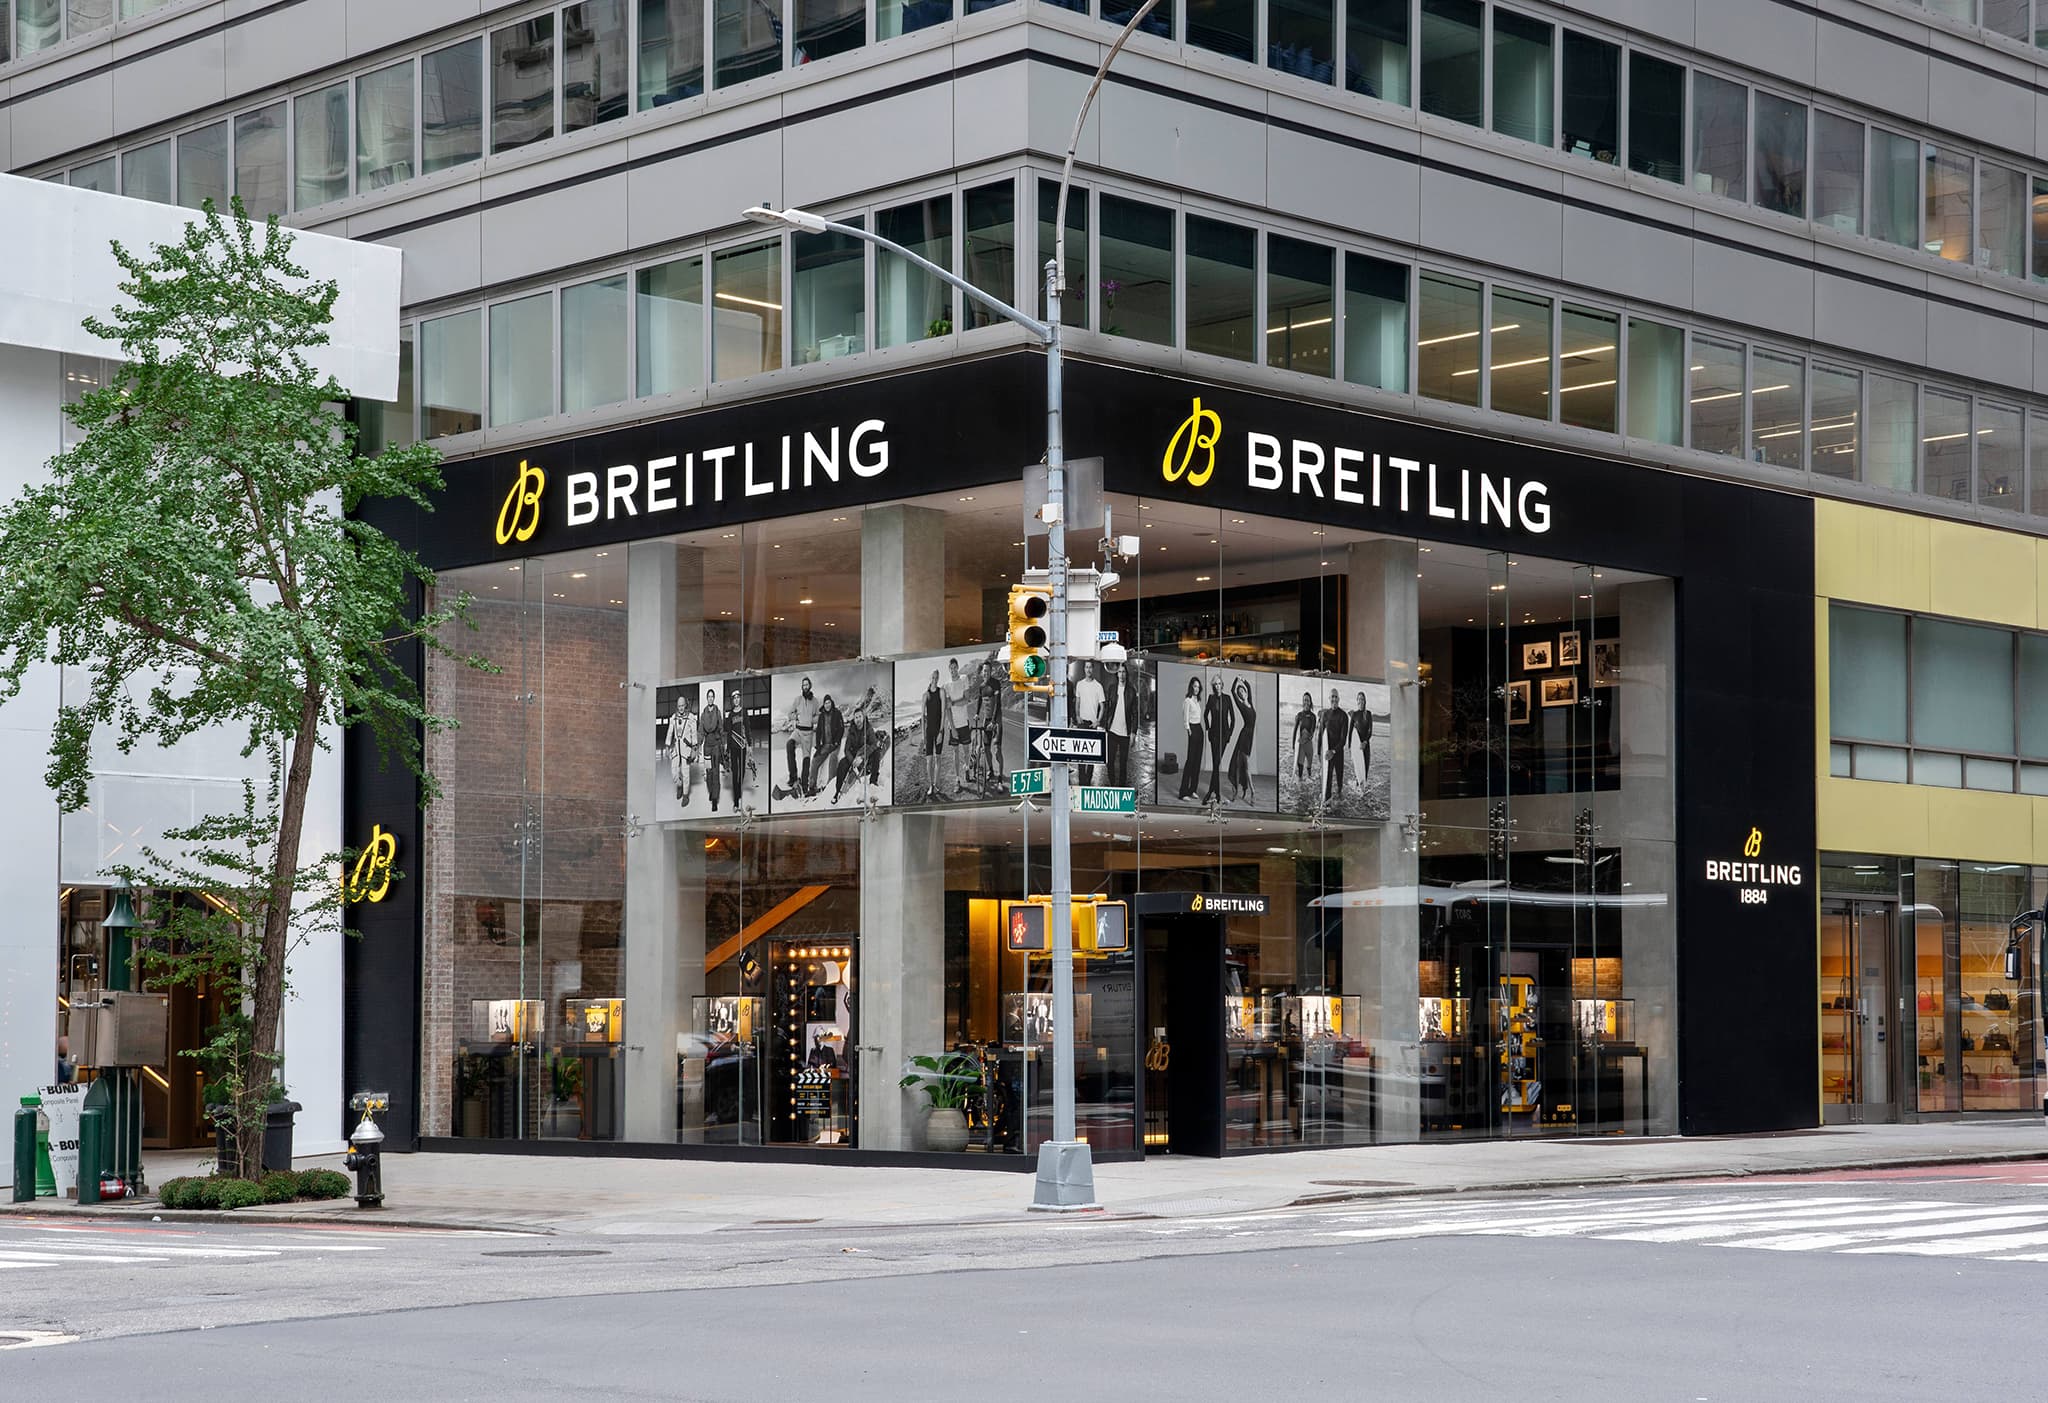 The redesigned Breitling New York flagship store features two floors, 90 feet of wrap-around sidewalk frontage, and a 4,300-square-foot space